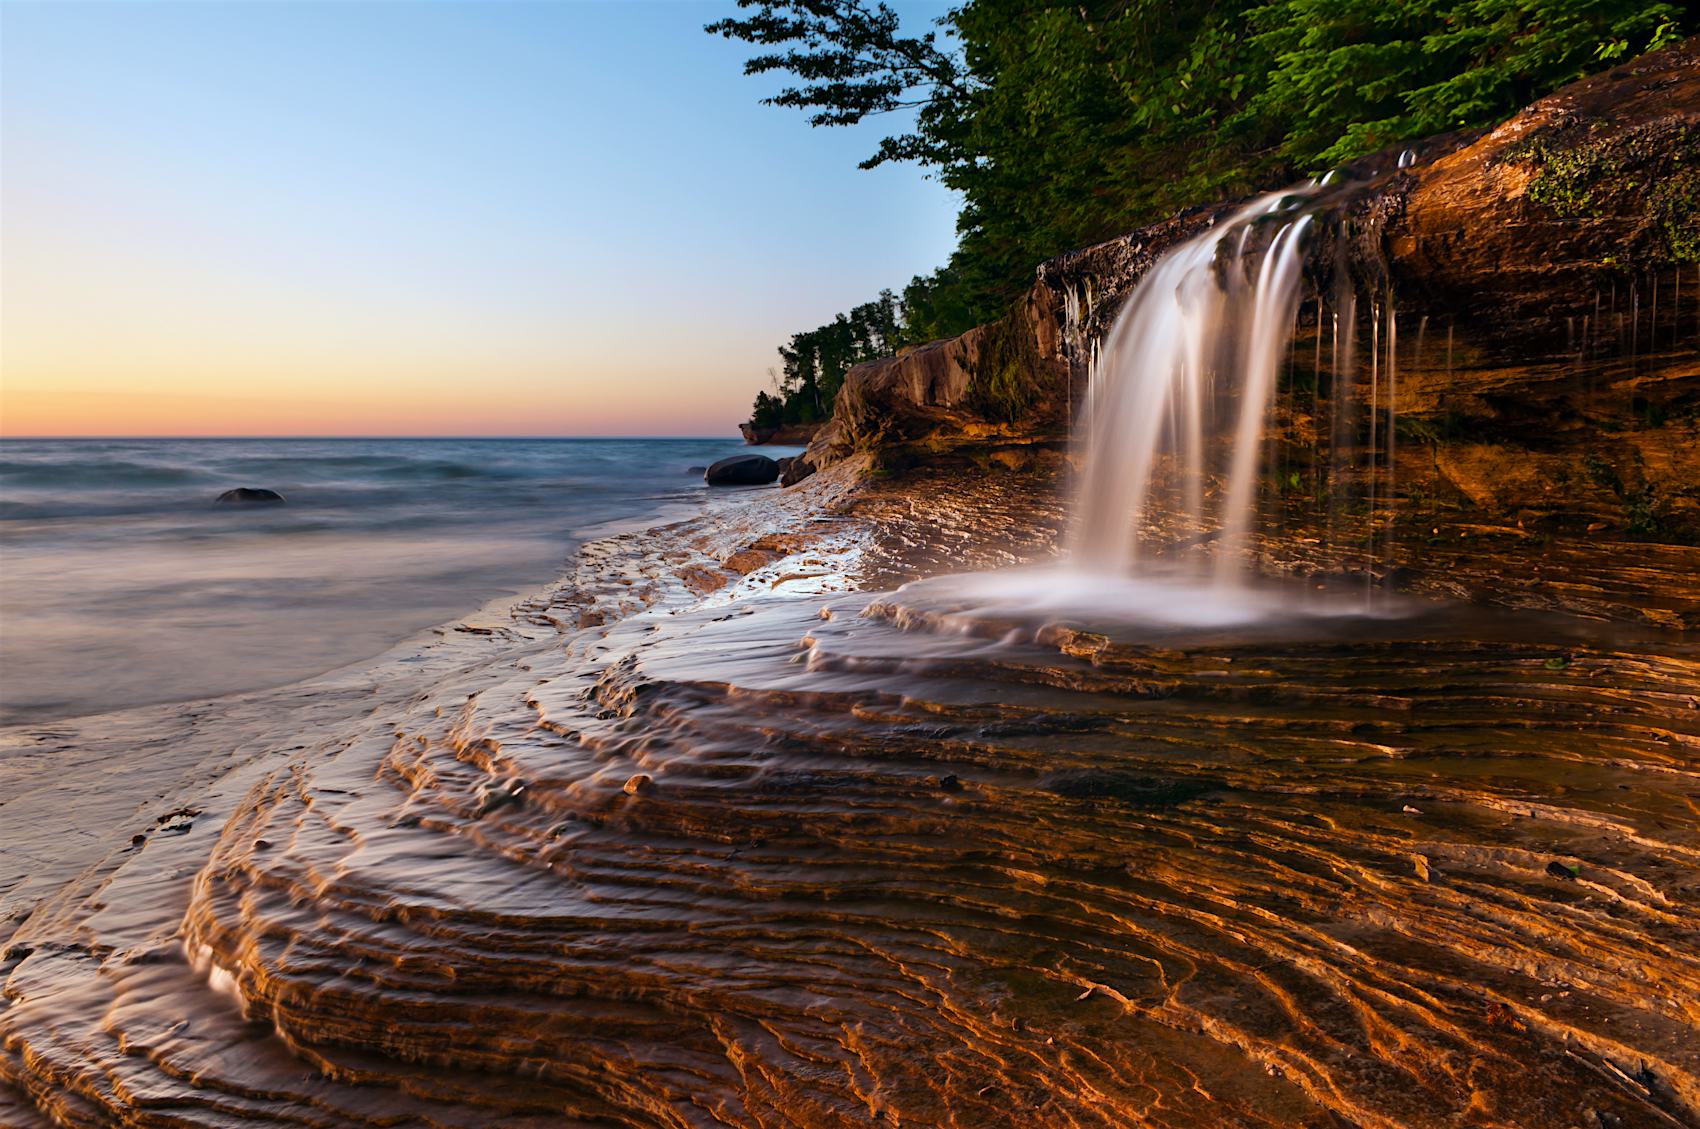 Michigan’s best moments 11 things to see and do in the Great Lakes